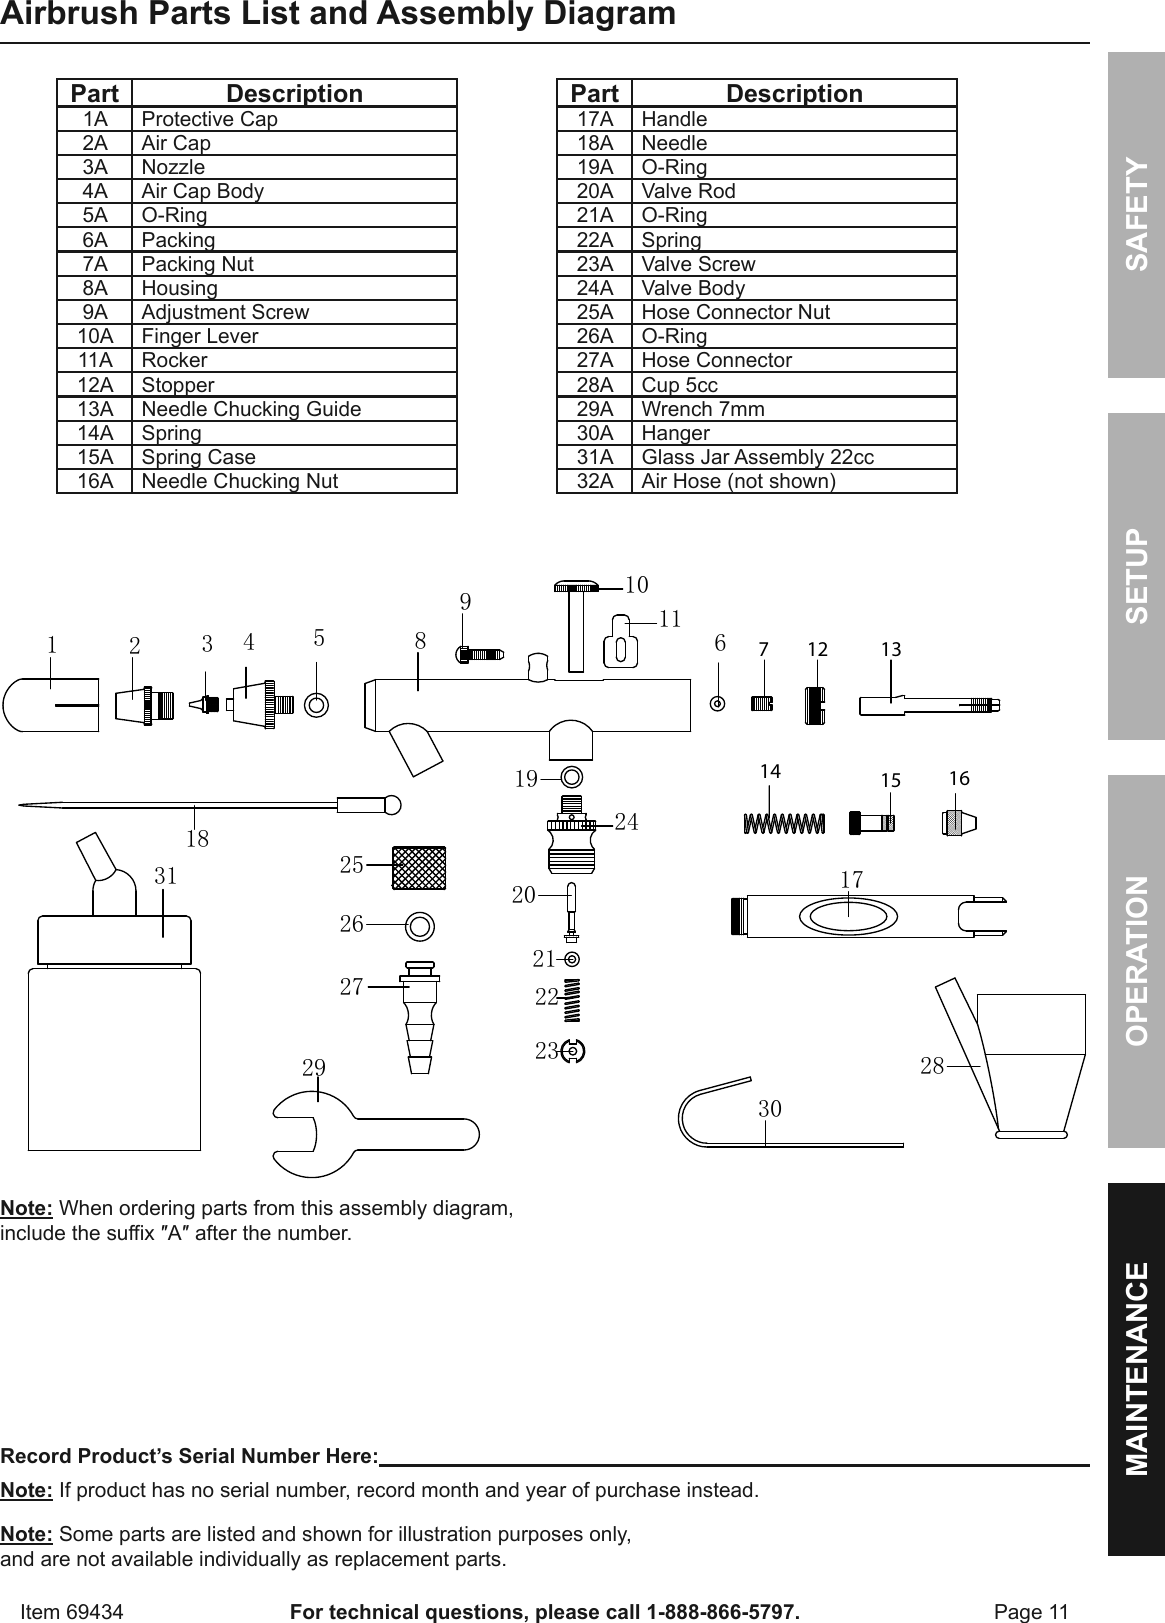 Page 11 of 12 - Manual For The 69434 1/5 Horsepower, 58 PSI Airbrush Compressor And Kit